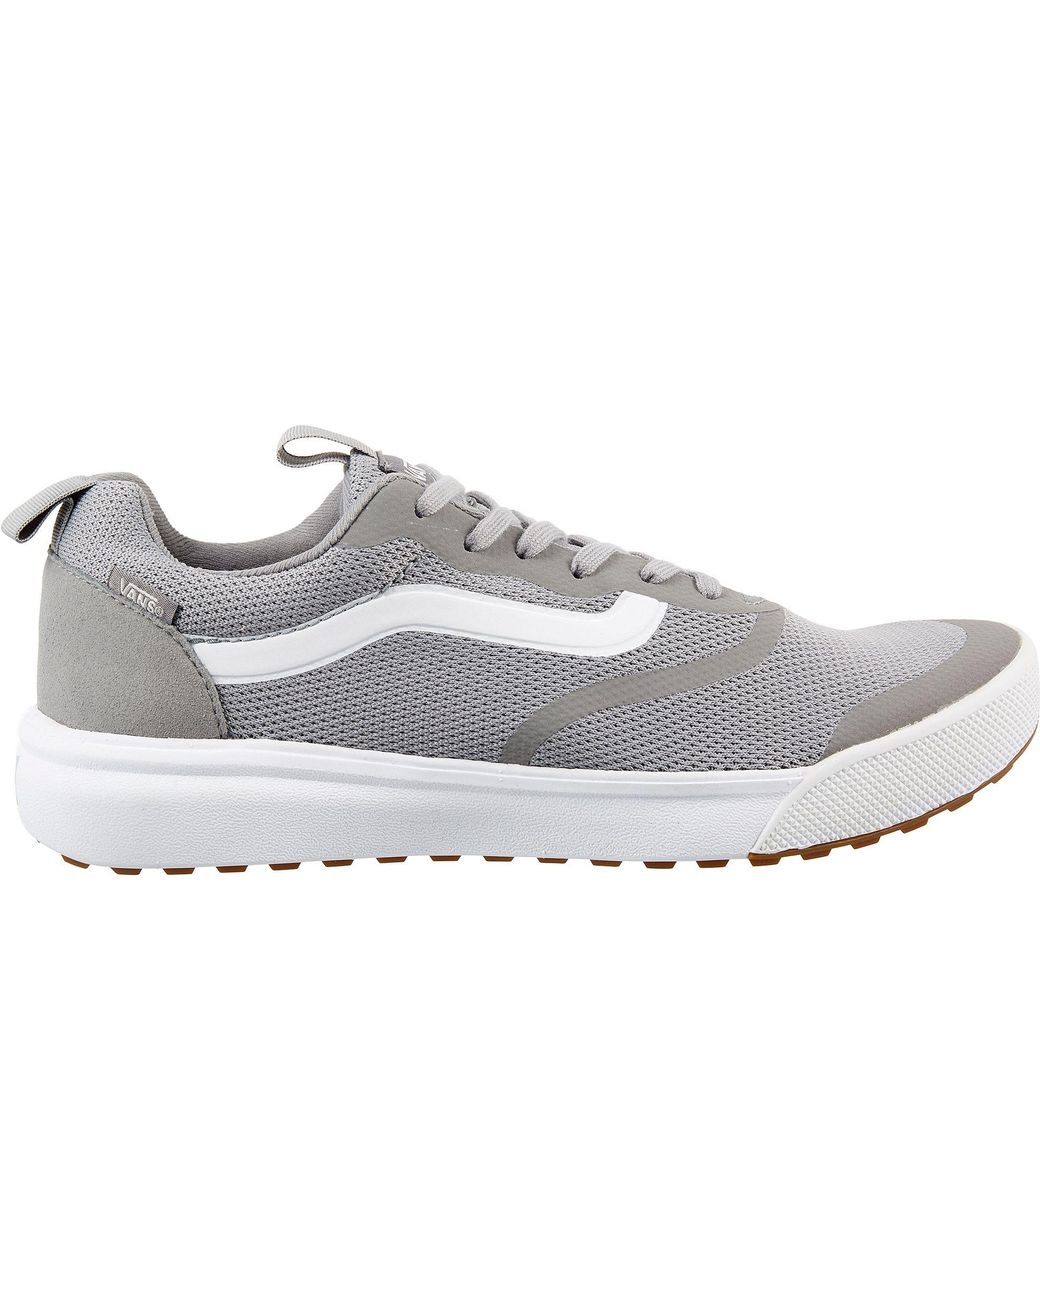 Vans Synthetic Ultrarange Rapidweld Shoes in Grey/White (Gray) for Men ...